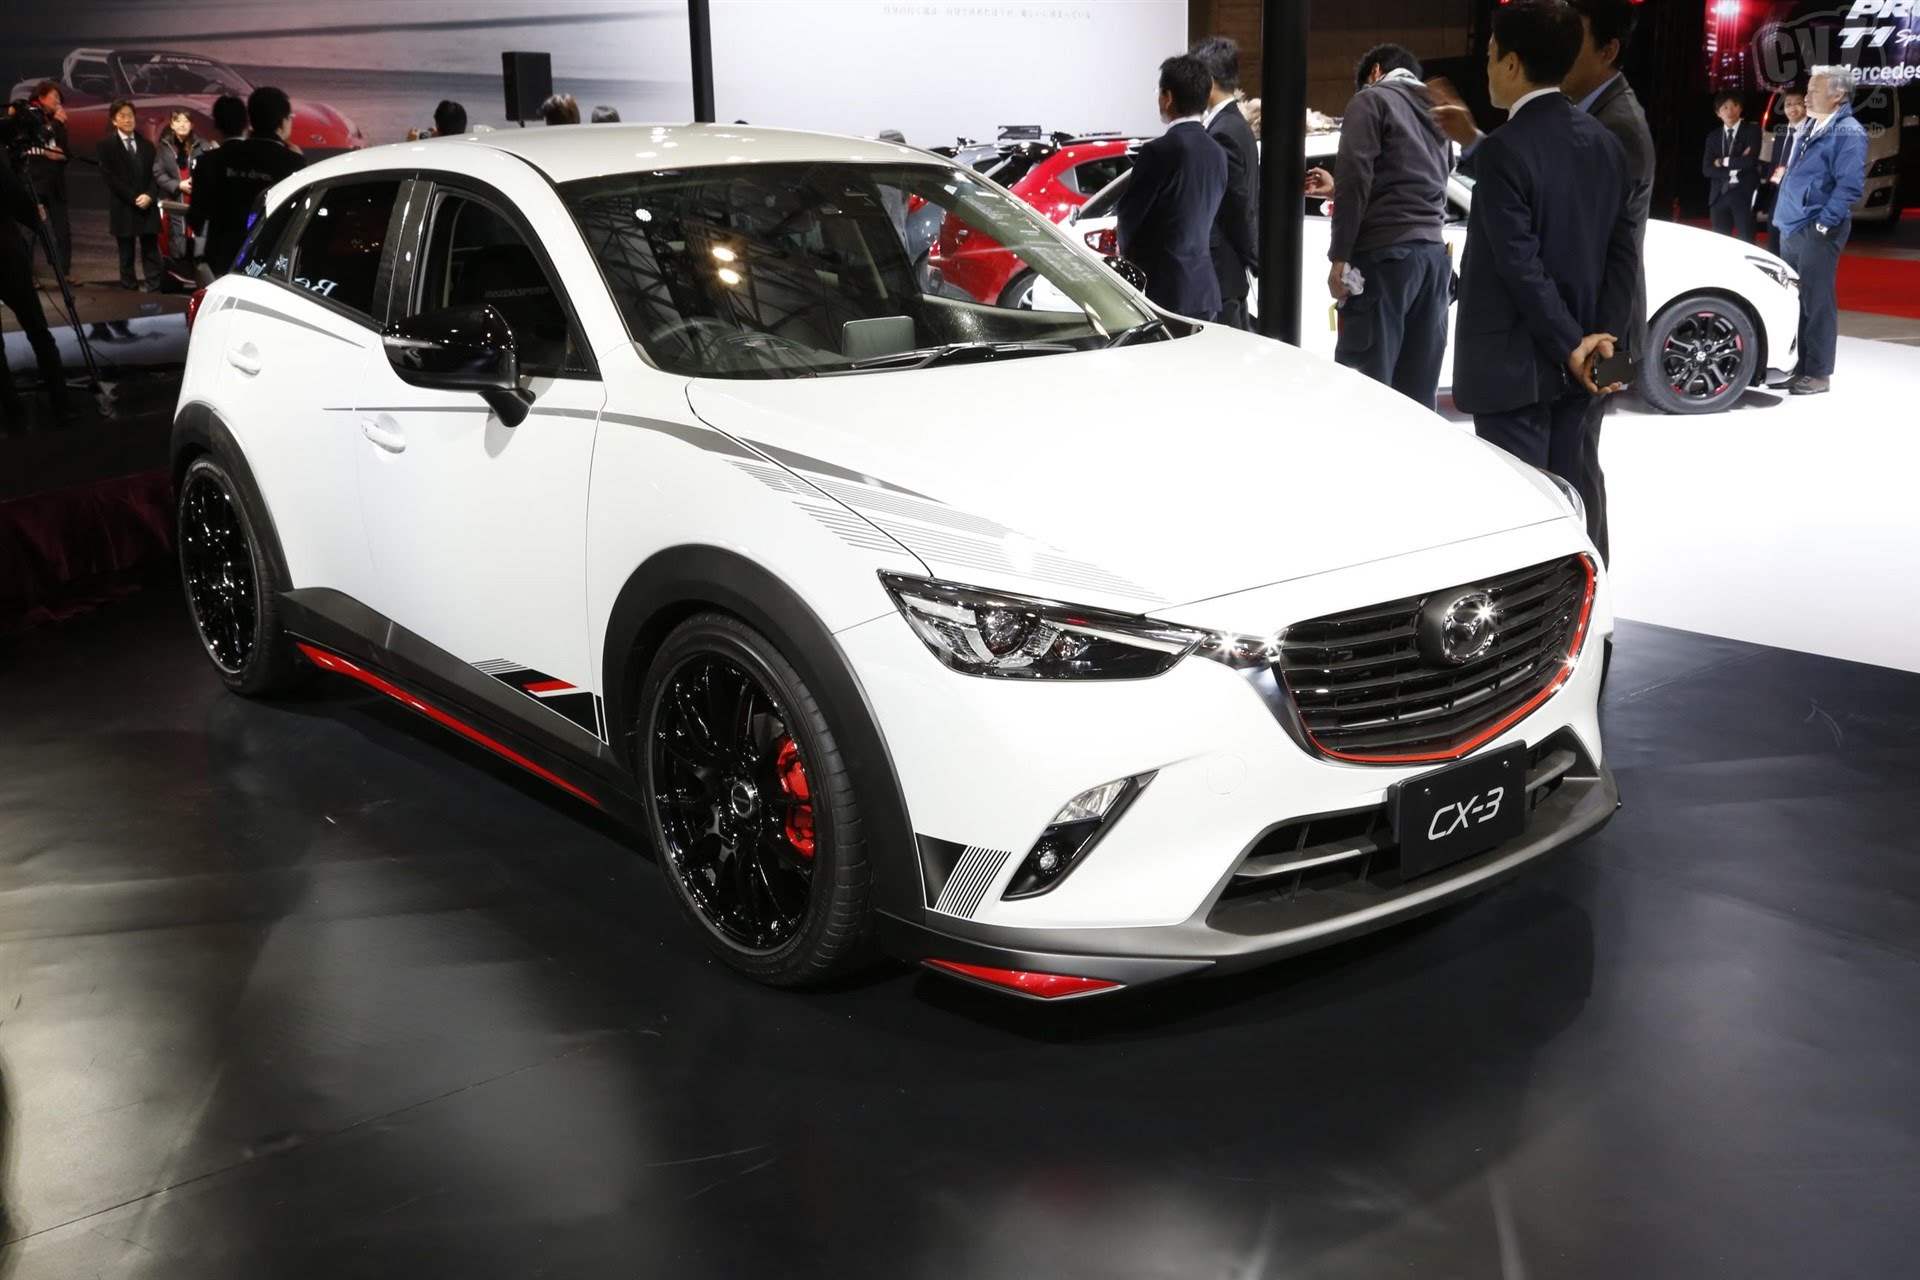 Mazda Cx-3 2016 Photos - Mazda Cx 3 Sport Package , HD Wallpaper & Backgrounds